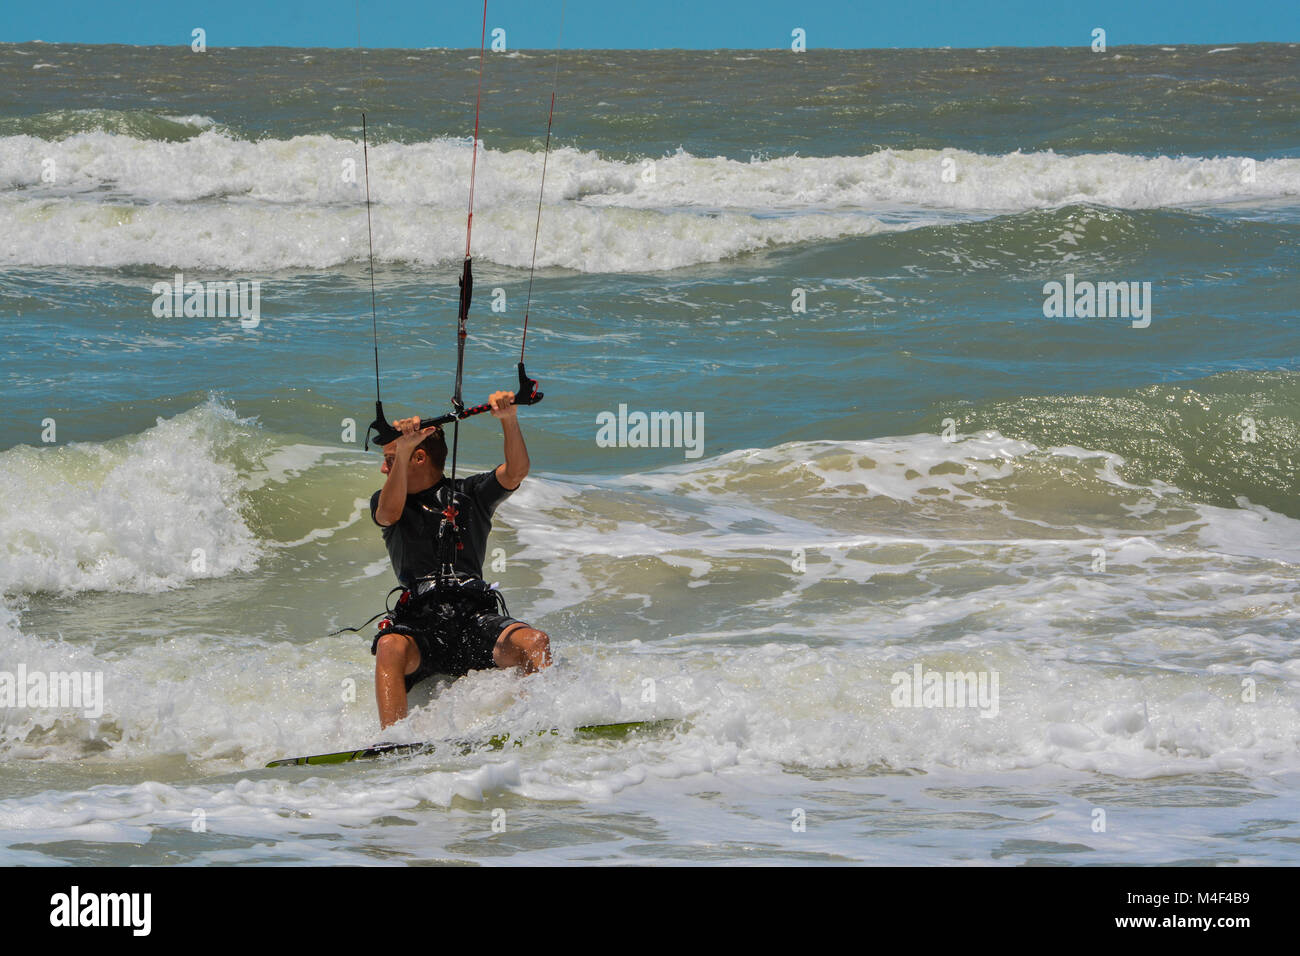 A Kite Boarder navigating the surf Stock Photo